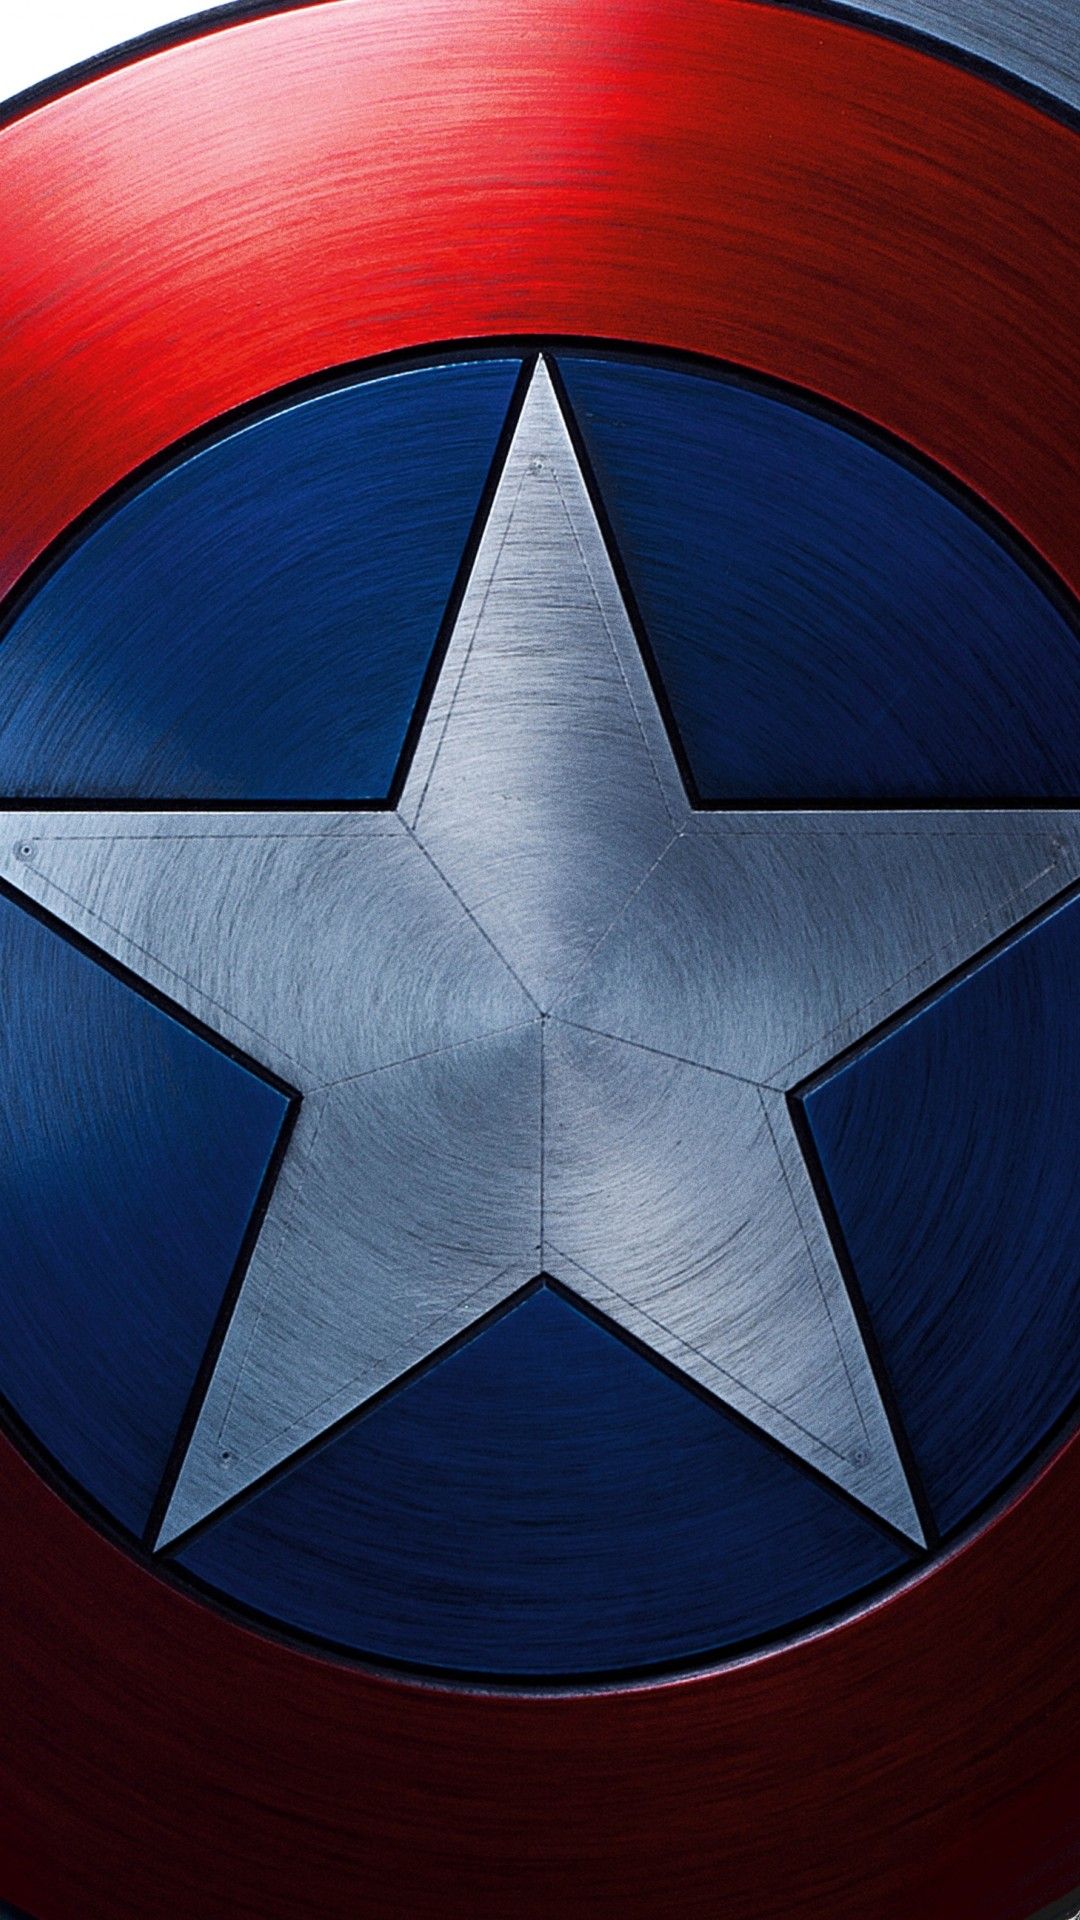 Marvel Wallpaper for iPhone HD